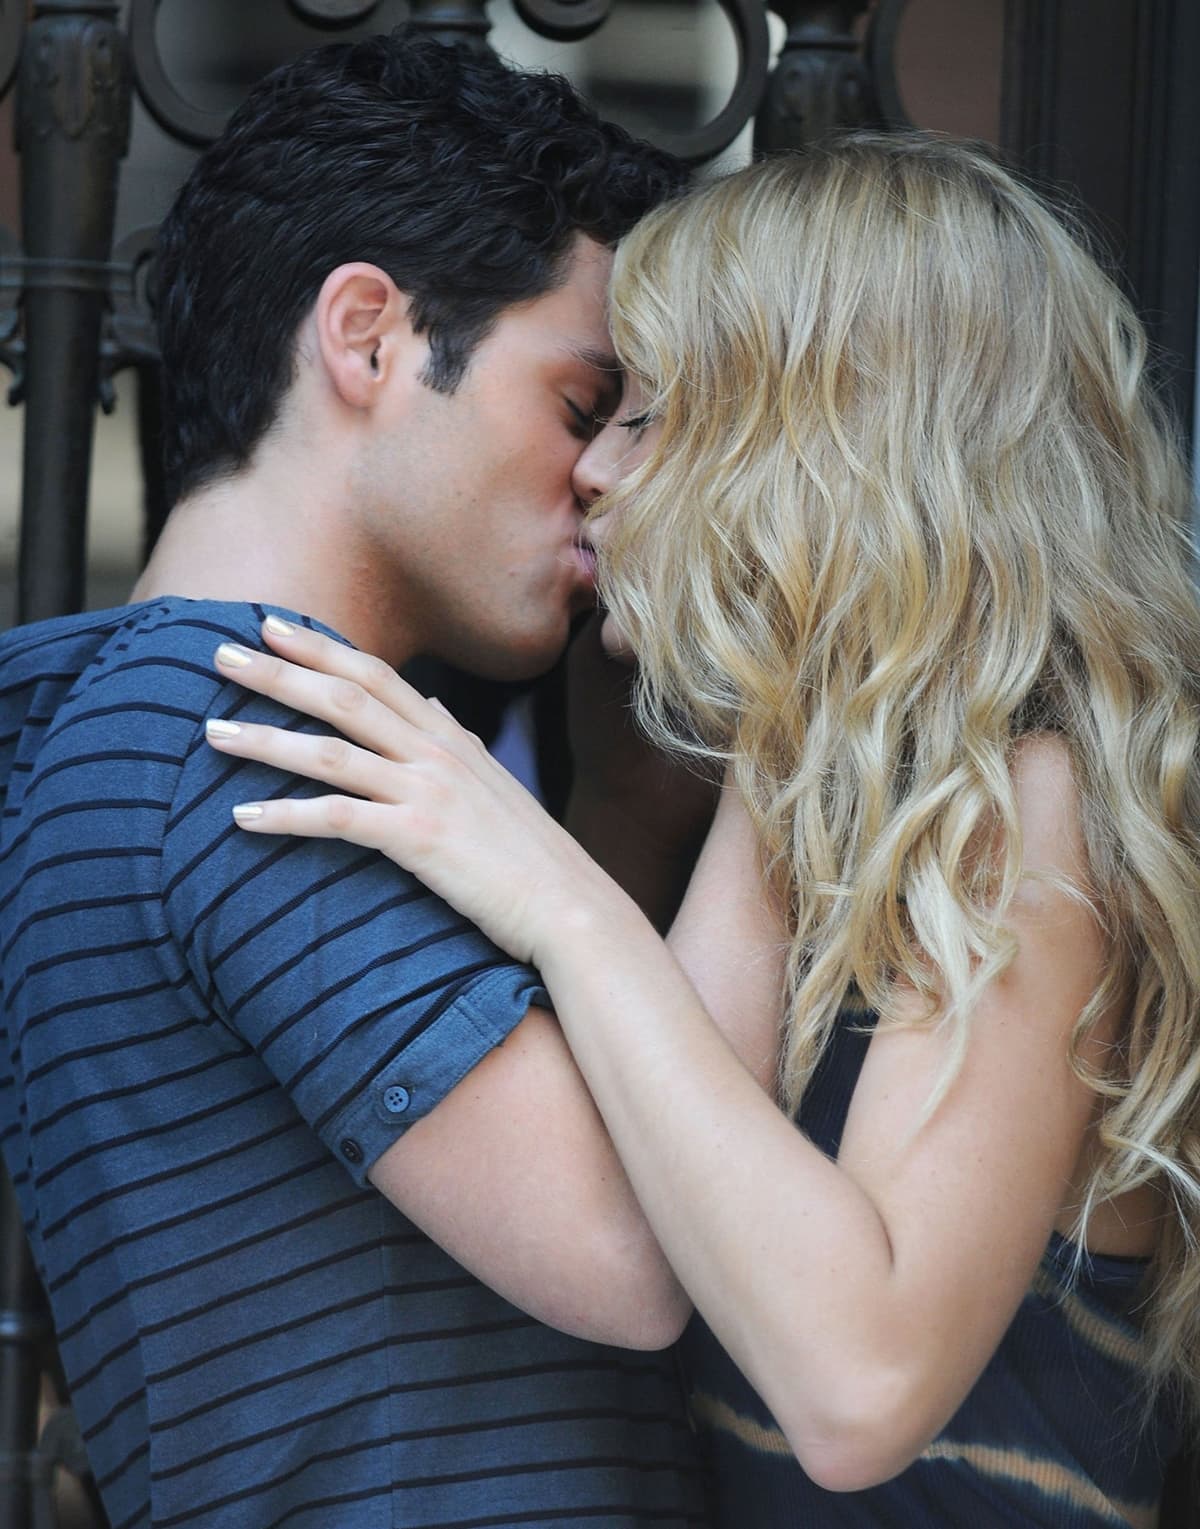 Blake Lively and Penn Badgley kissing on the film set for the television series Gossip Girl